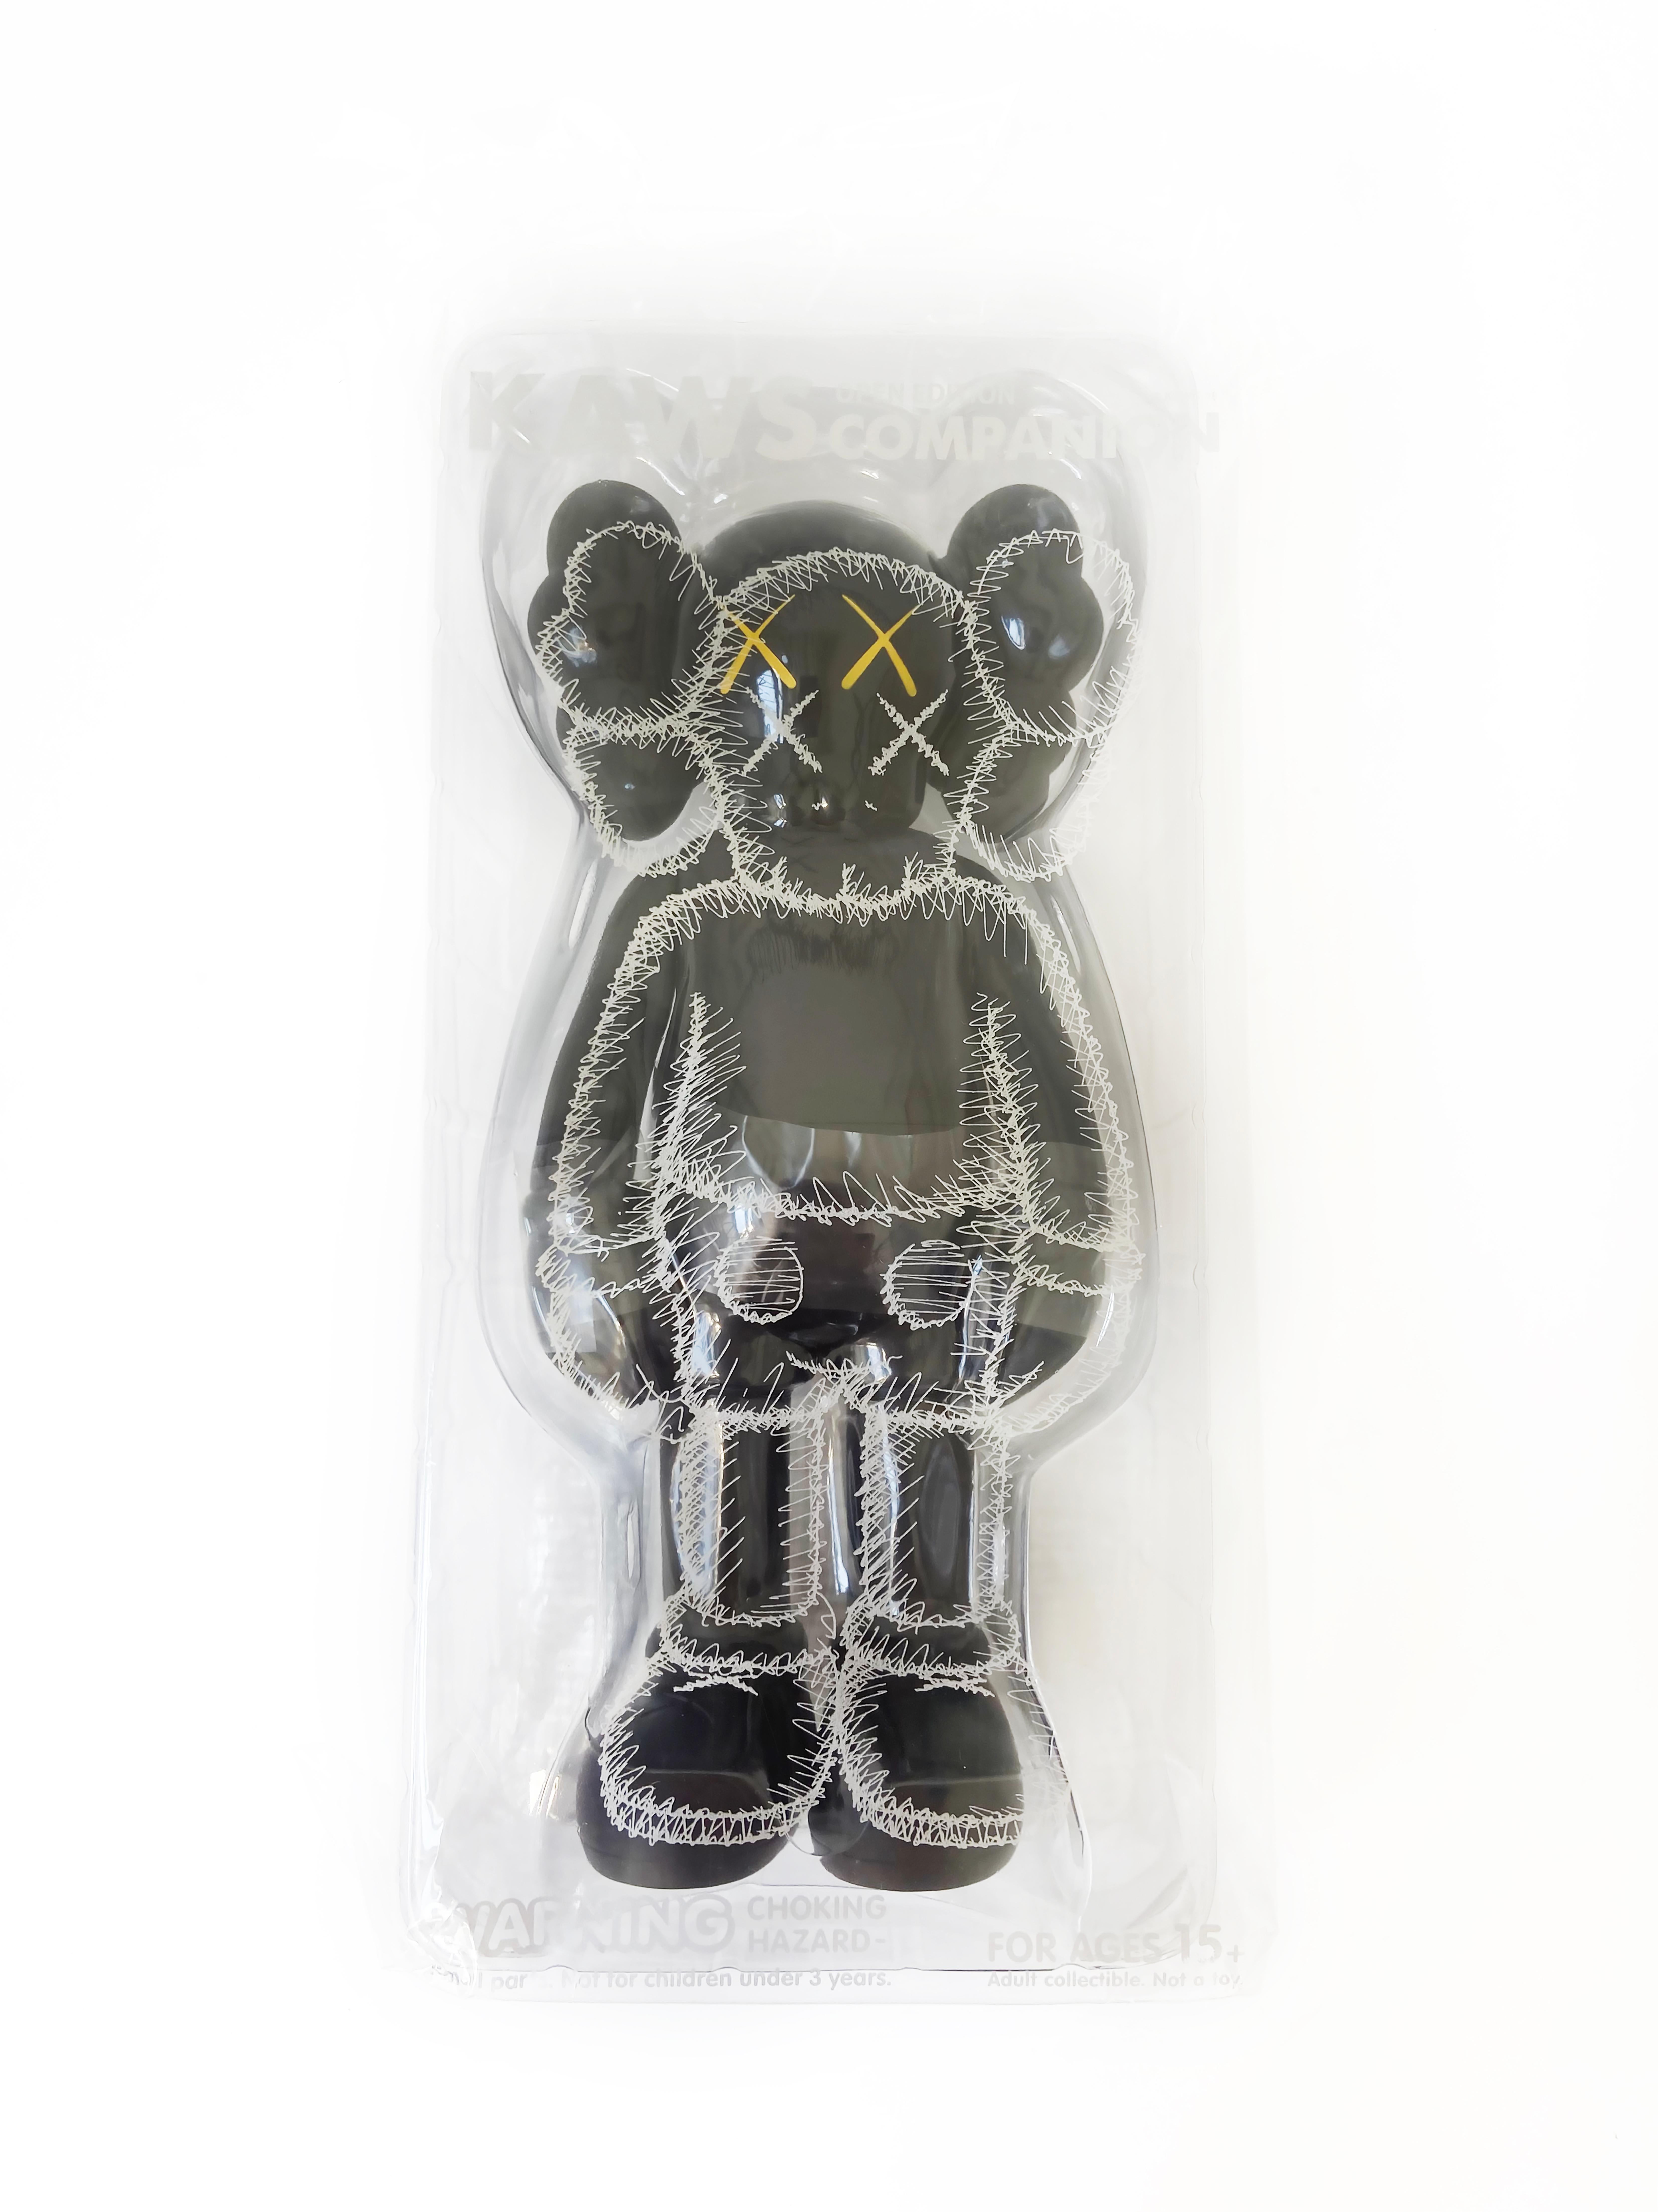 what is kaws known for